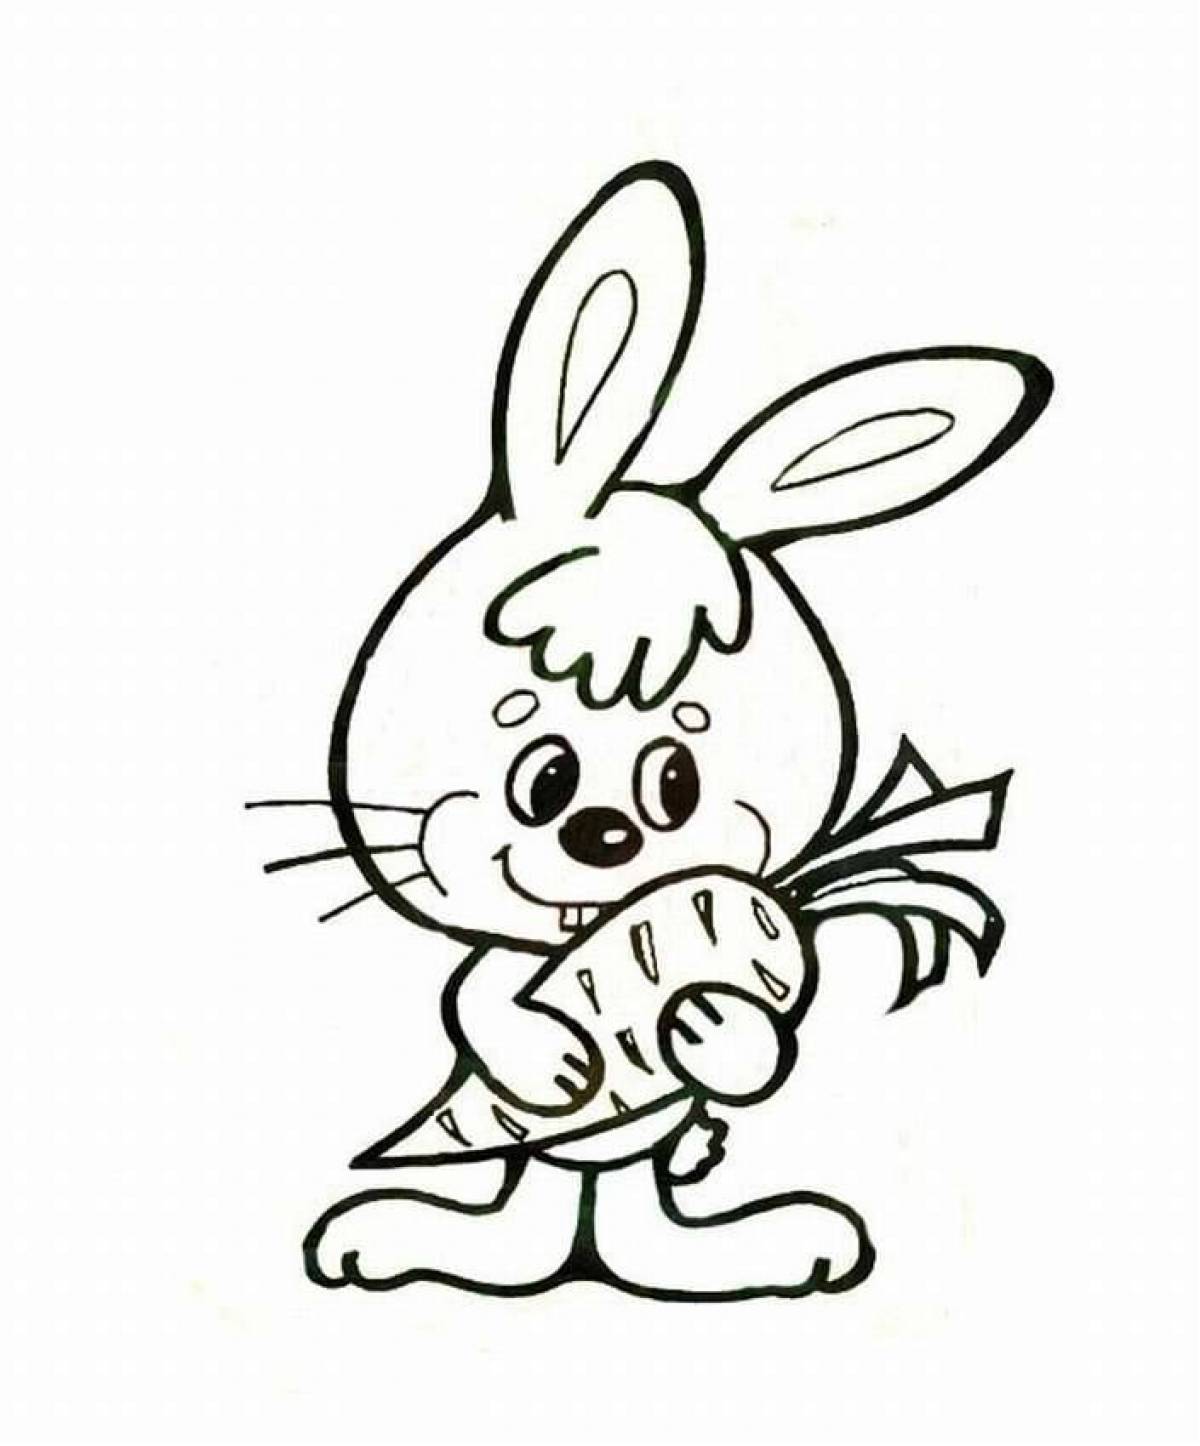 Cute bunny coloring book for kids 3-4 years old